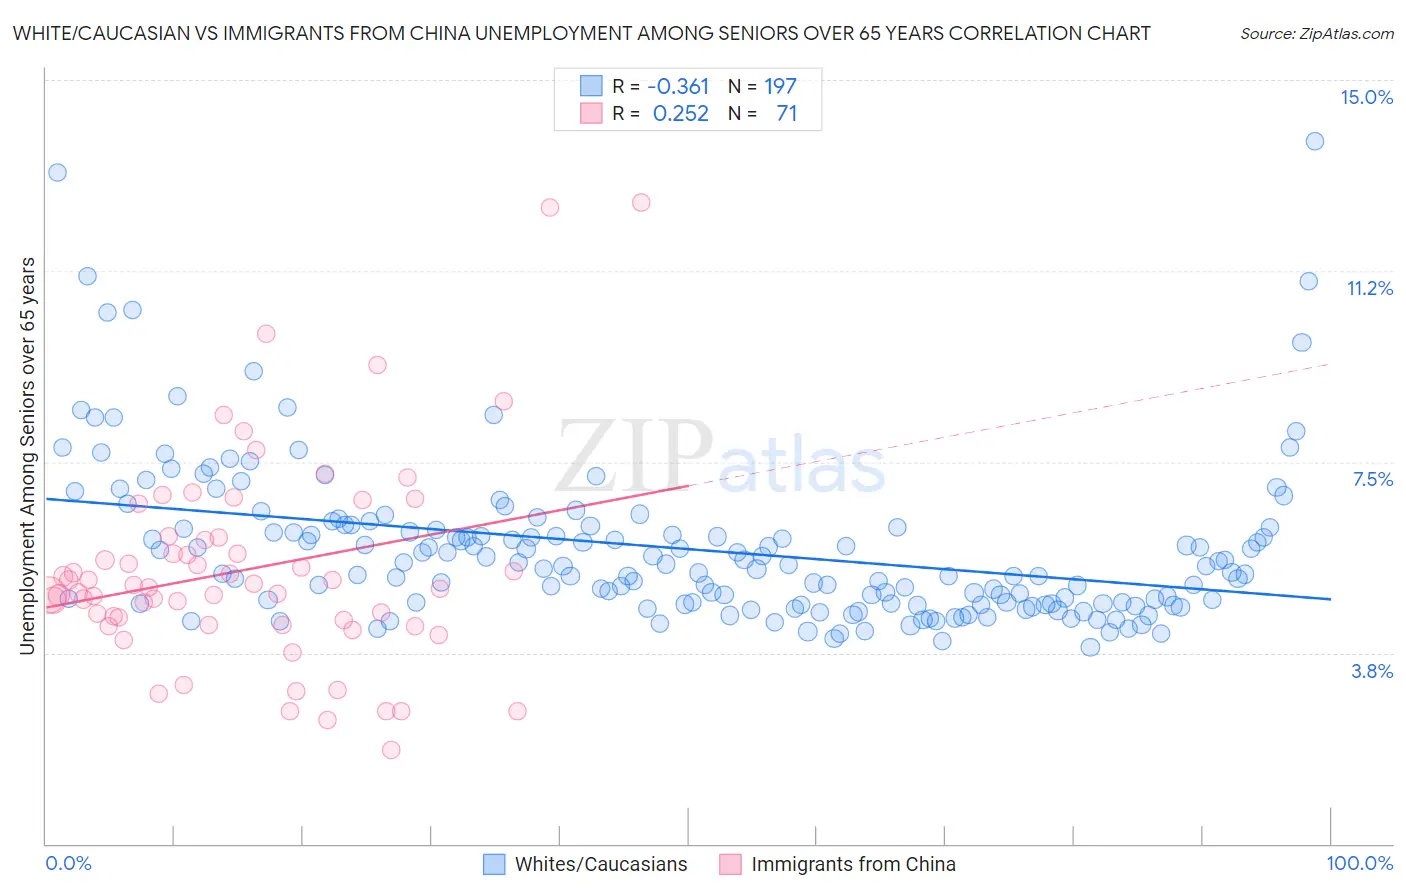 White/Caucasian vs Immigrants from China Unemployment Among Seniors over 65 years